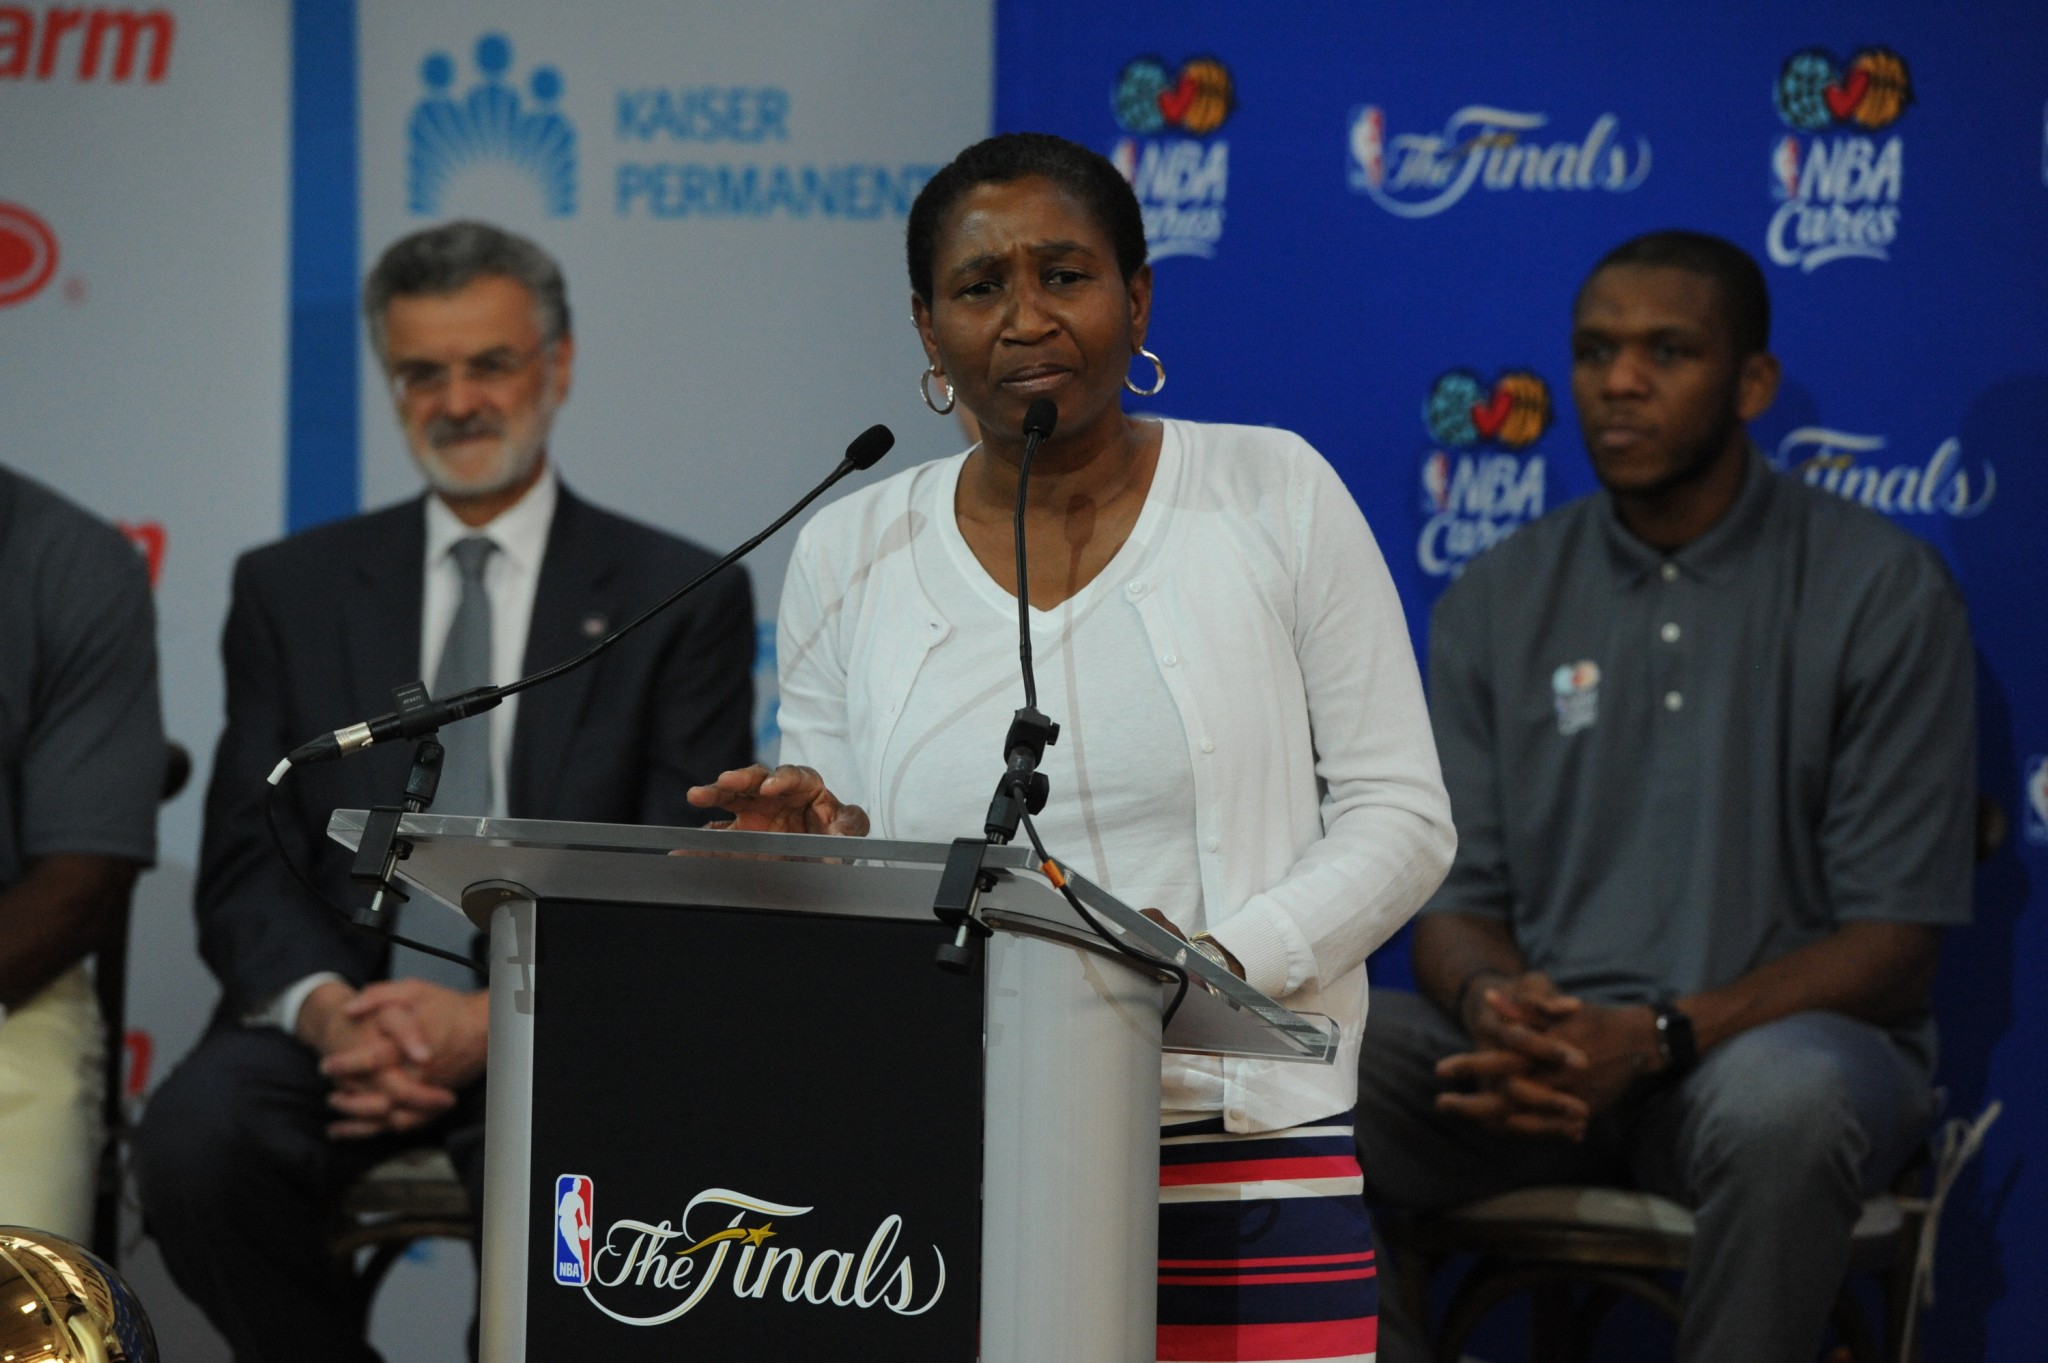 Michele Roberts speaks at a union event during the 2015 NBA Finals. (Garrett W. Ellwood/NBAE via Getty Images)